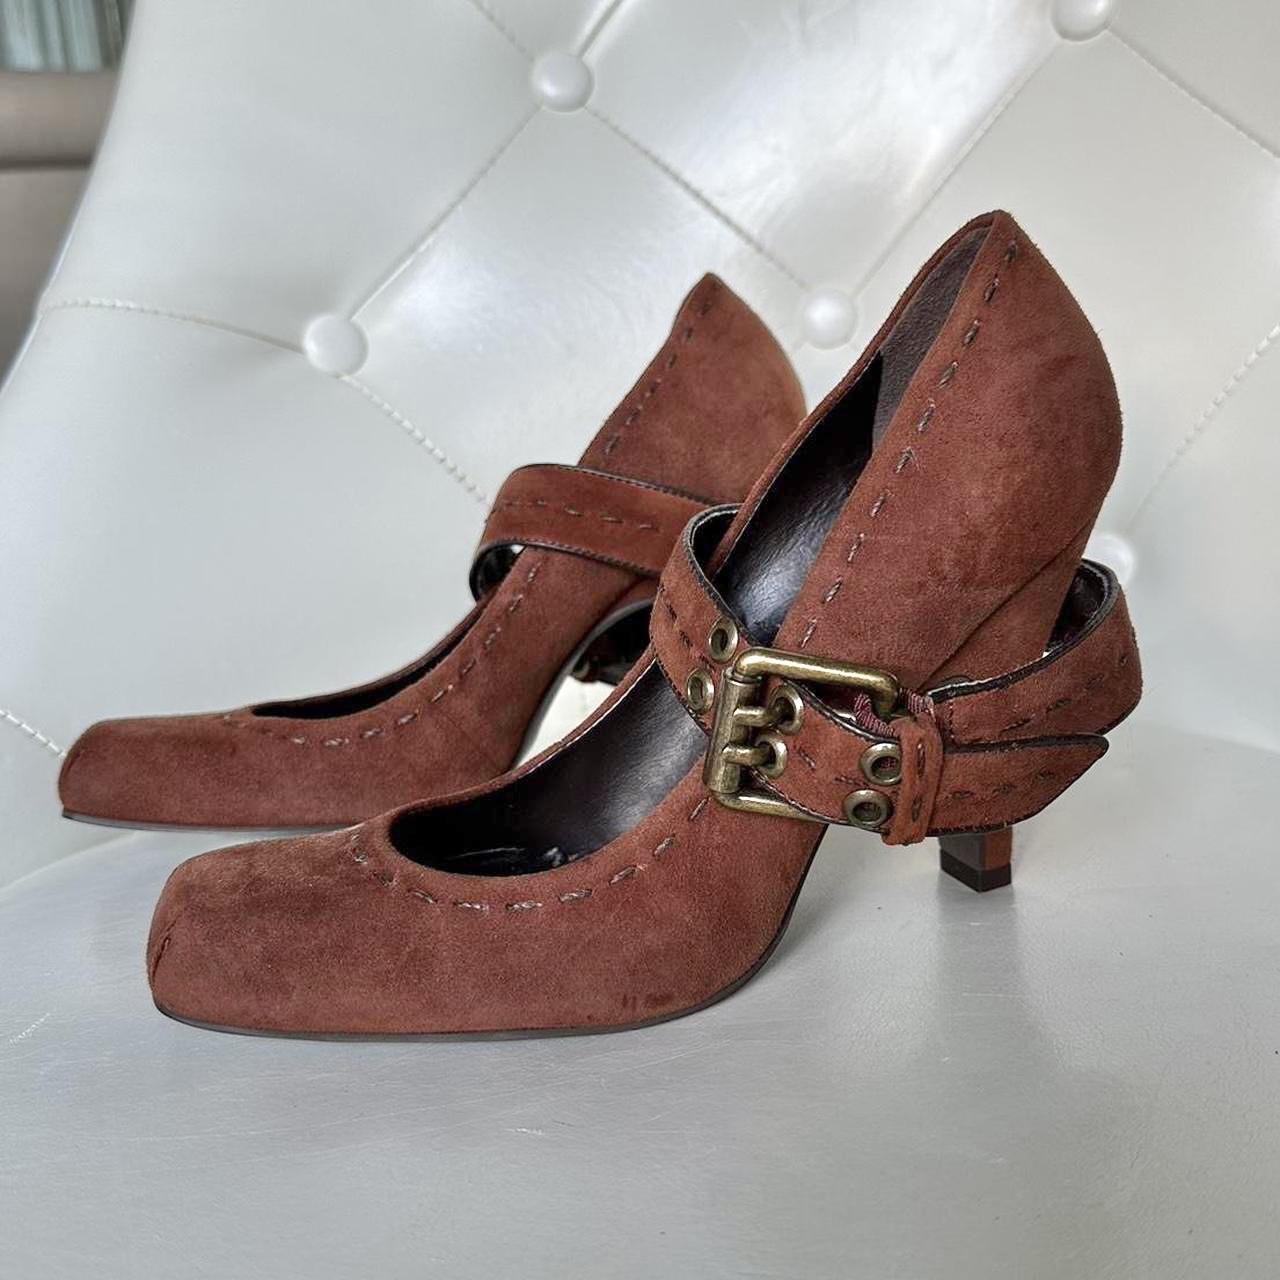 Vince Camuto Women's Brown Courts